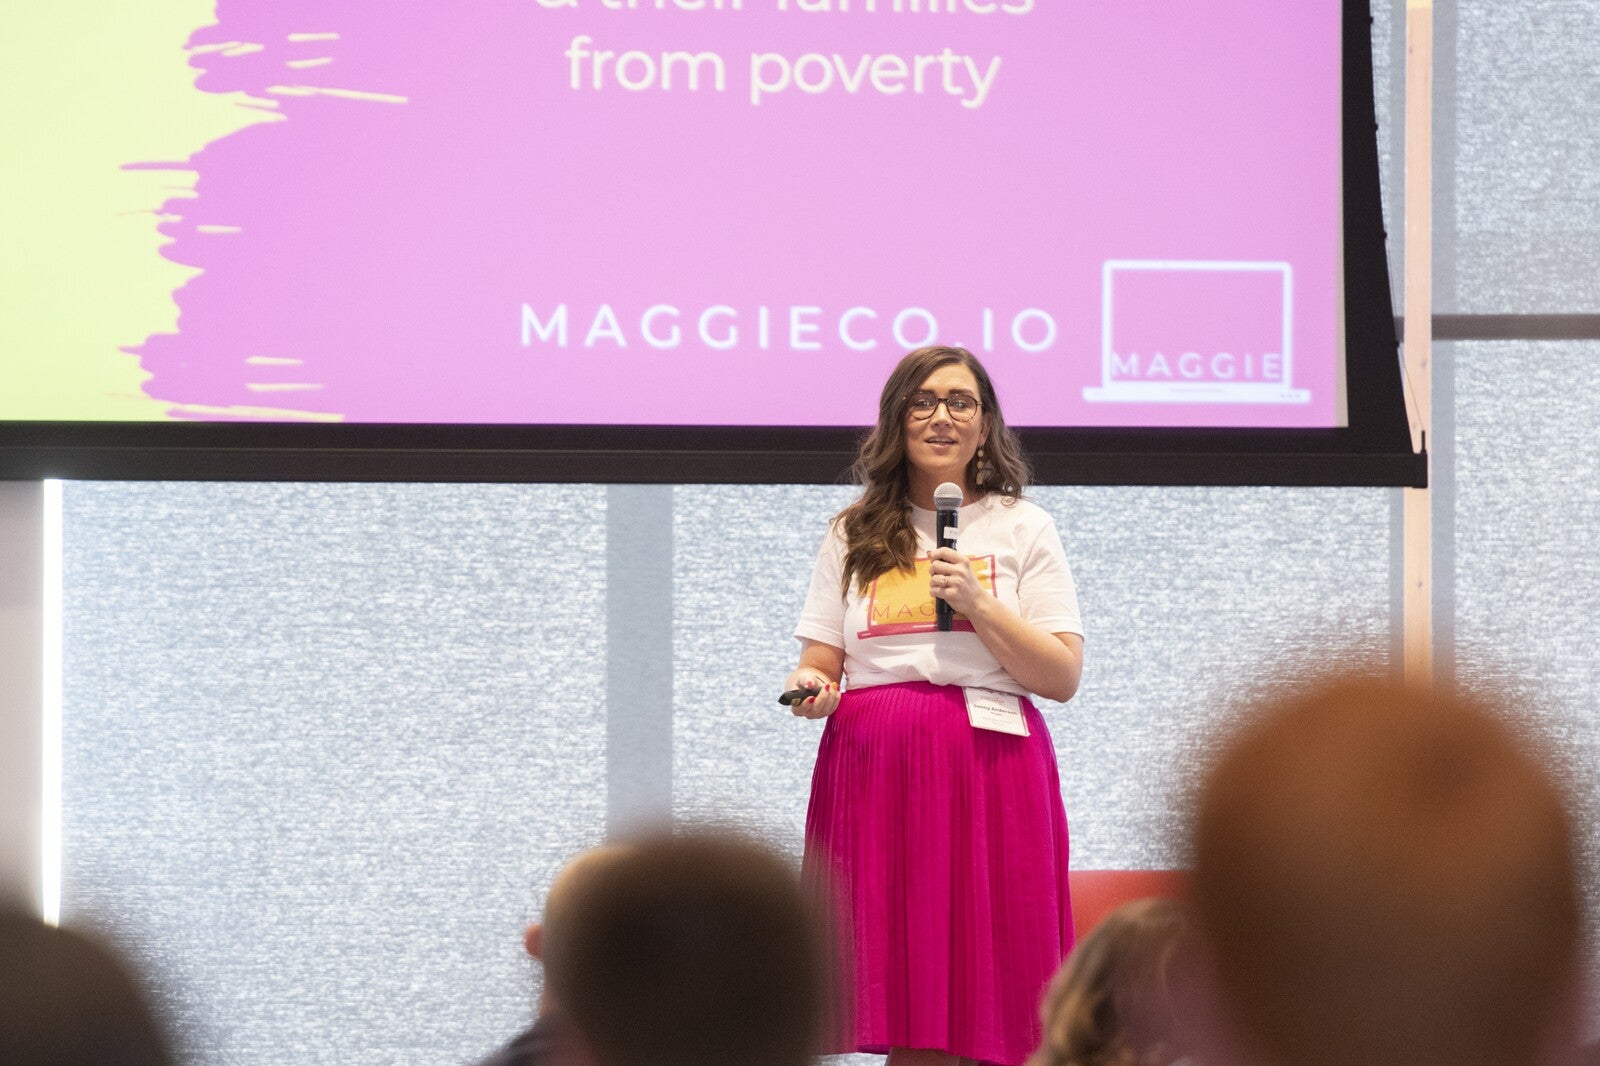 Maggie Co.io Pitching